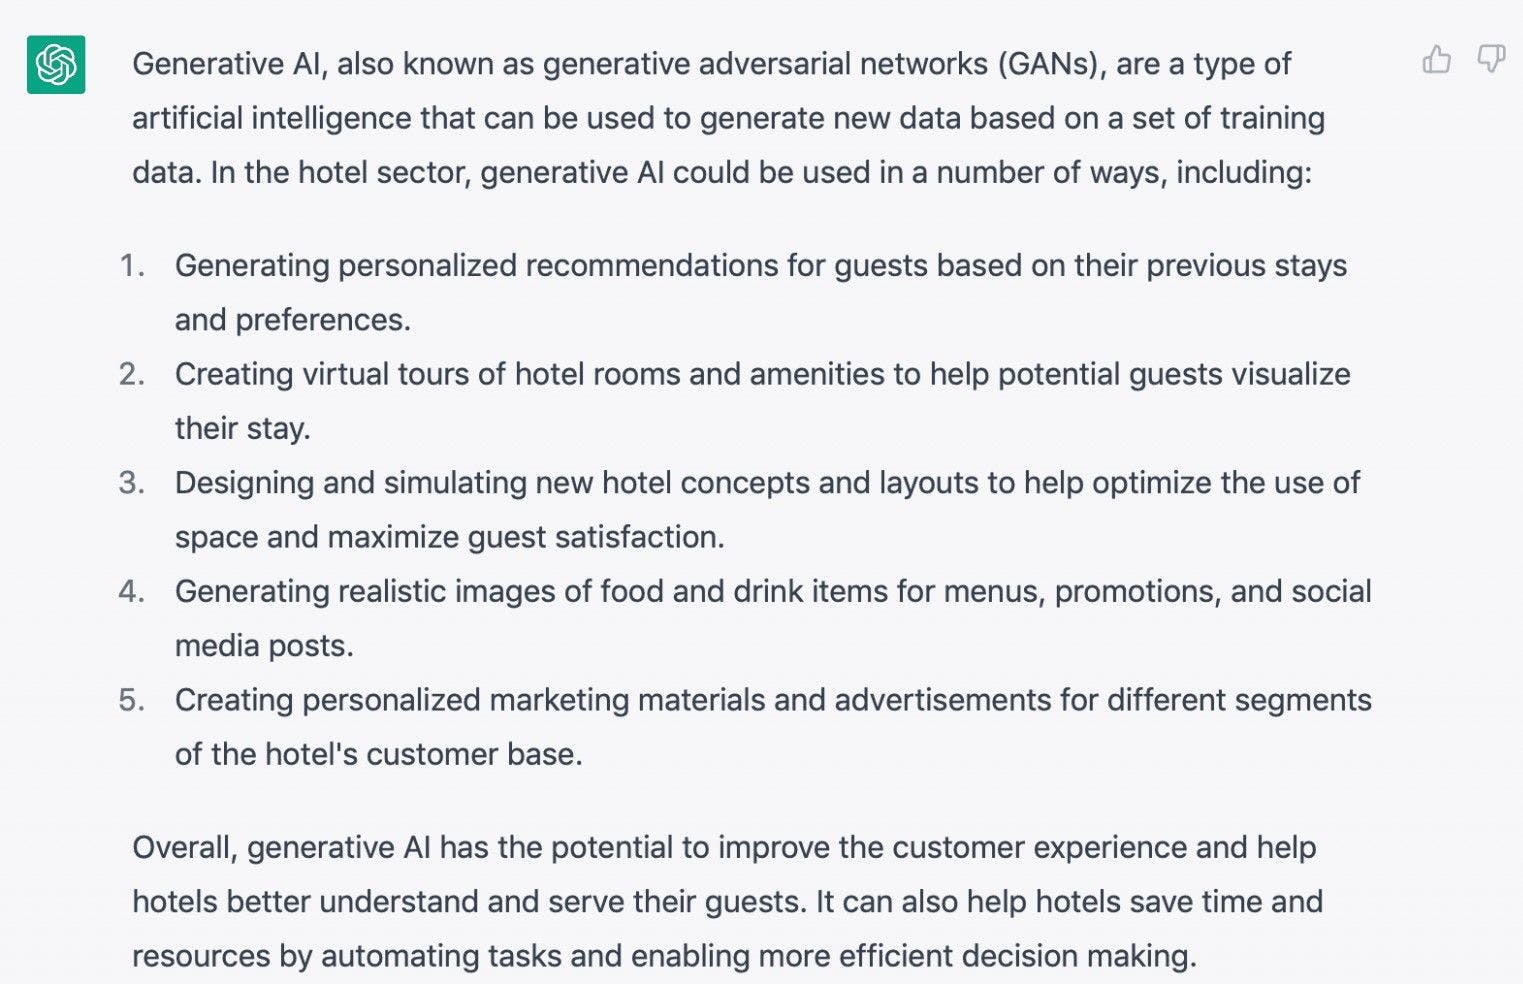 What are the applications of generative AI in the hotel sector?